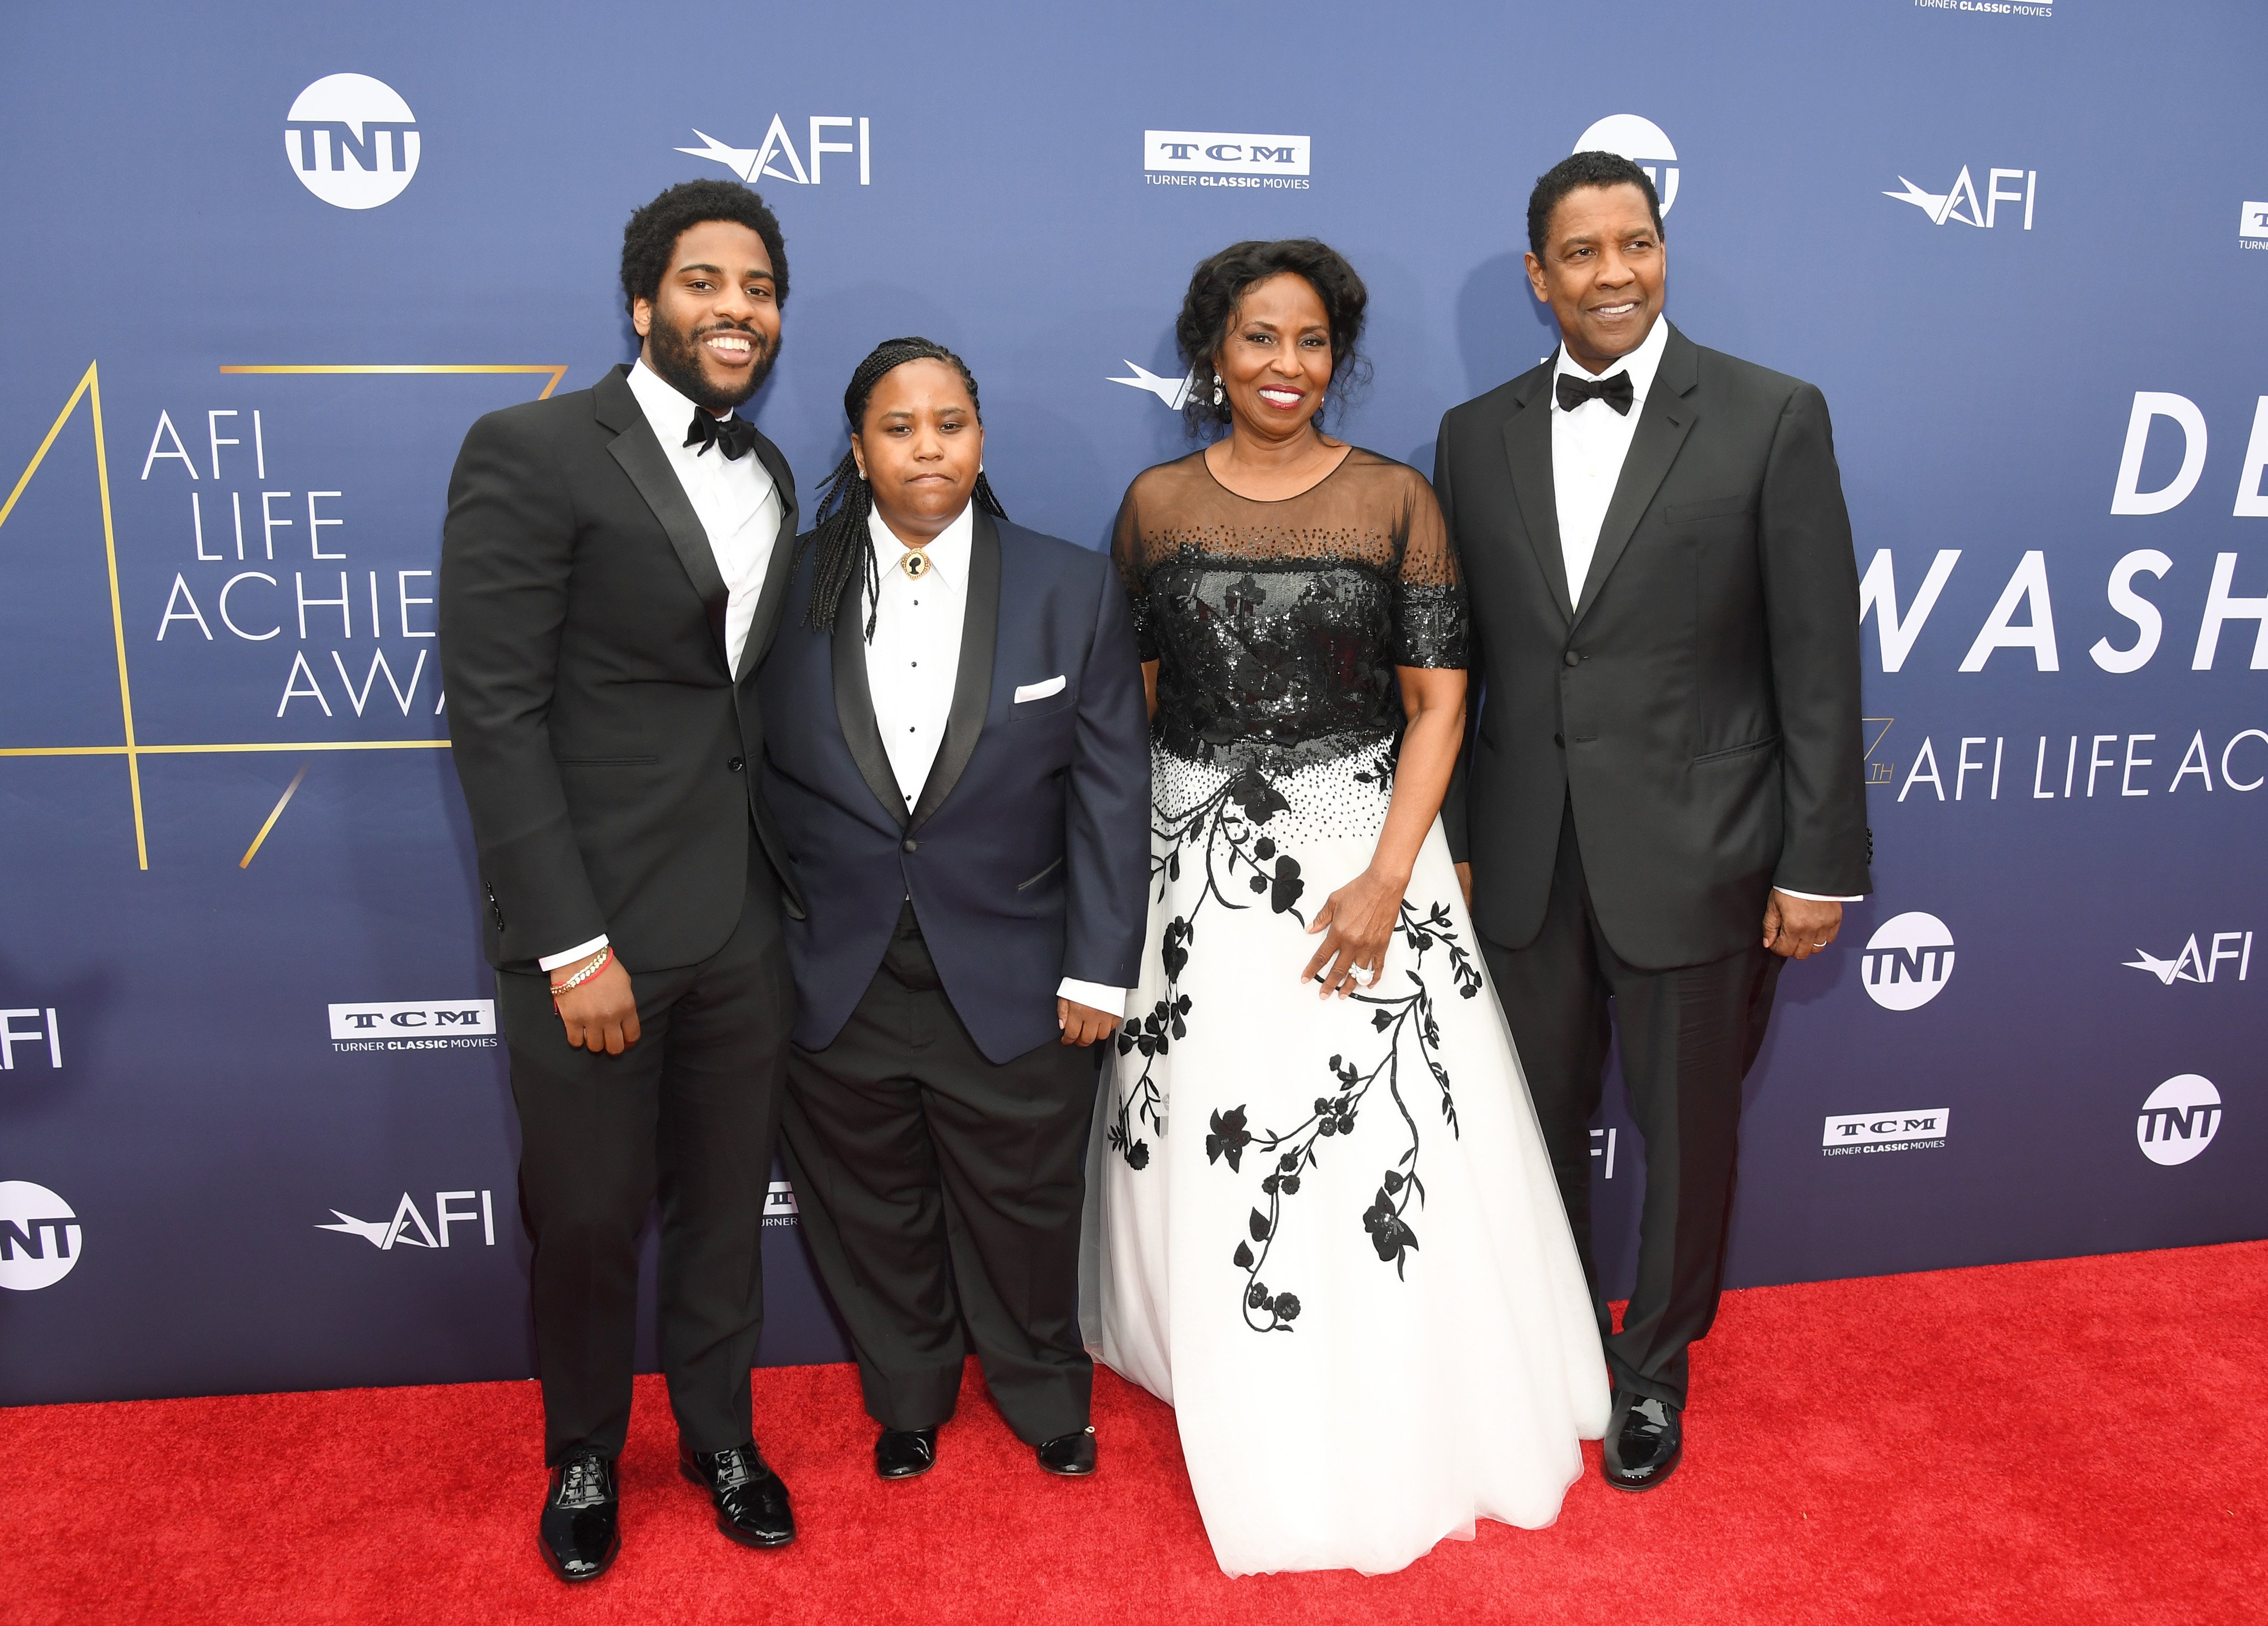 Pauletta Washington with children Malcolm and Katia at the 47th AFI Life Achievement Awards to witness Denzel Washington's honoring at Dolby Theatre on June 6, 2019. | Photo: Getty Images